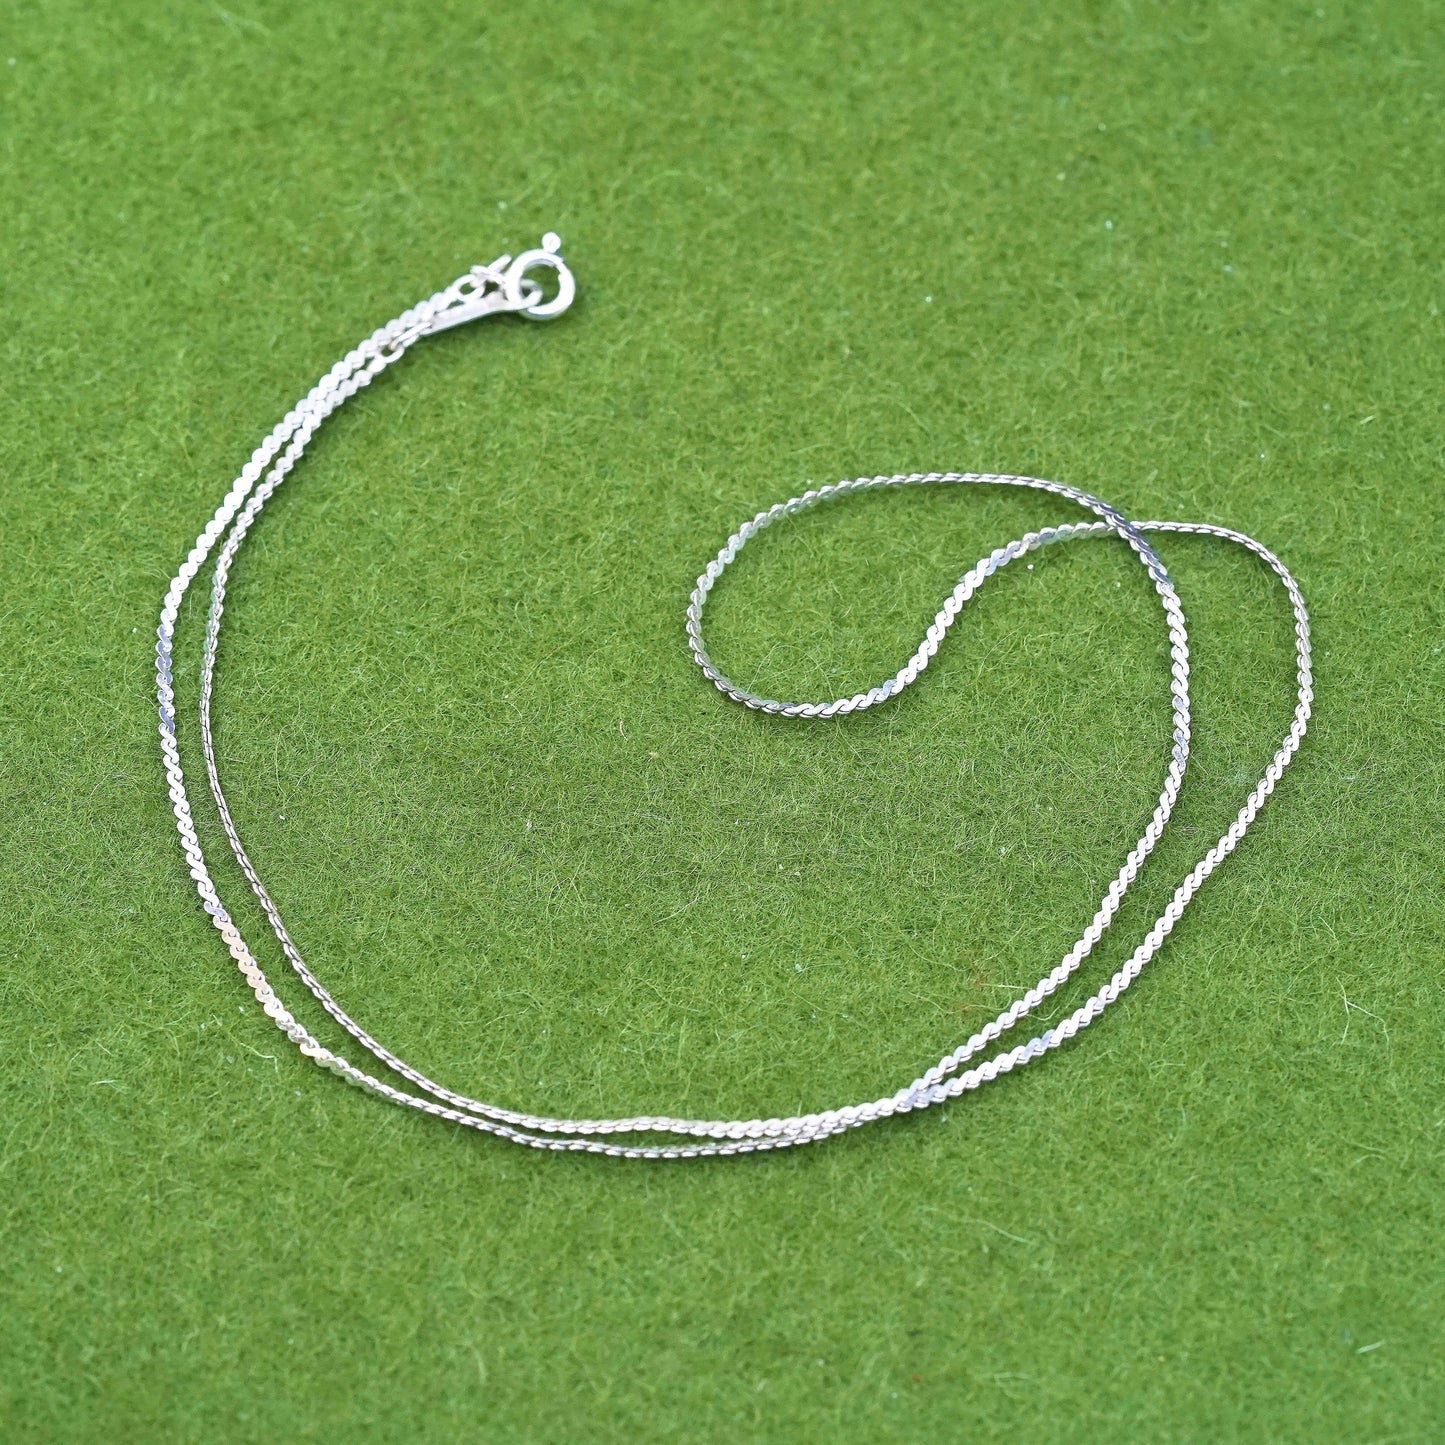 16”, 1mm, Vintage sterling silver Italy 925 s link chain, necklace